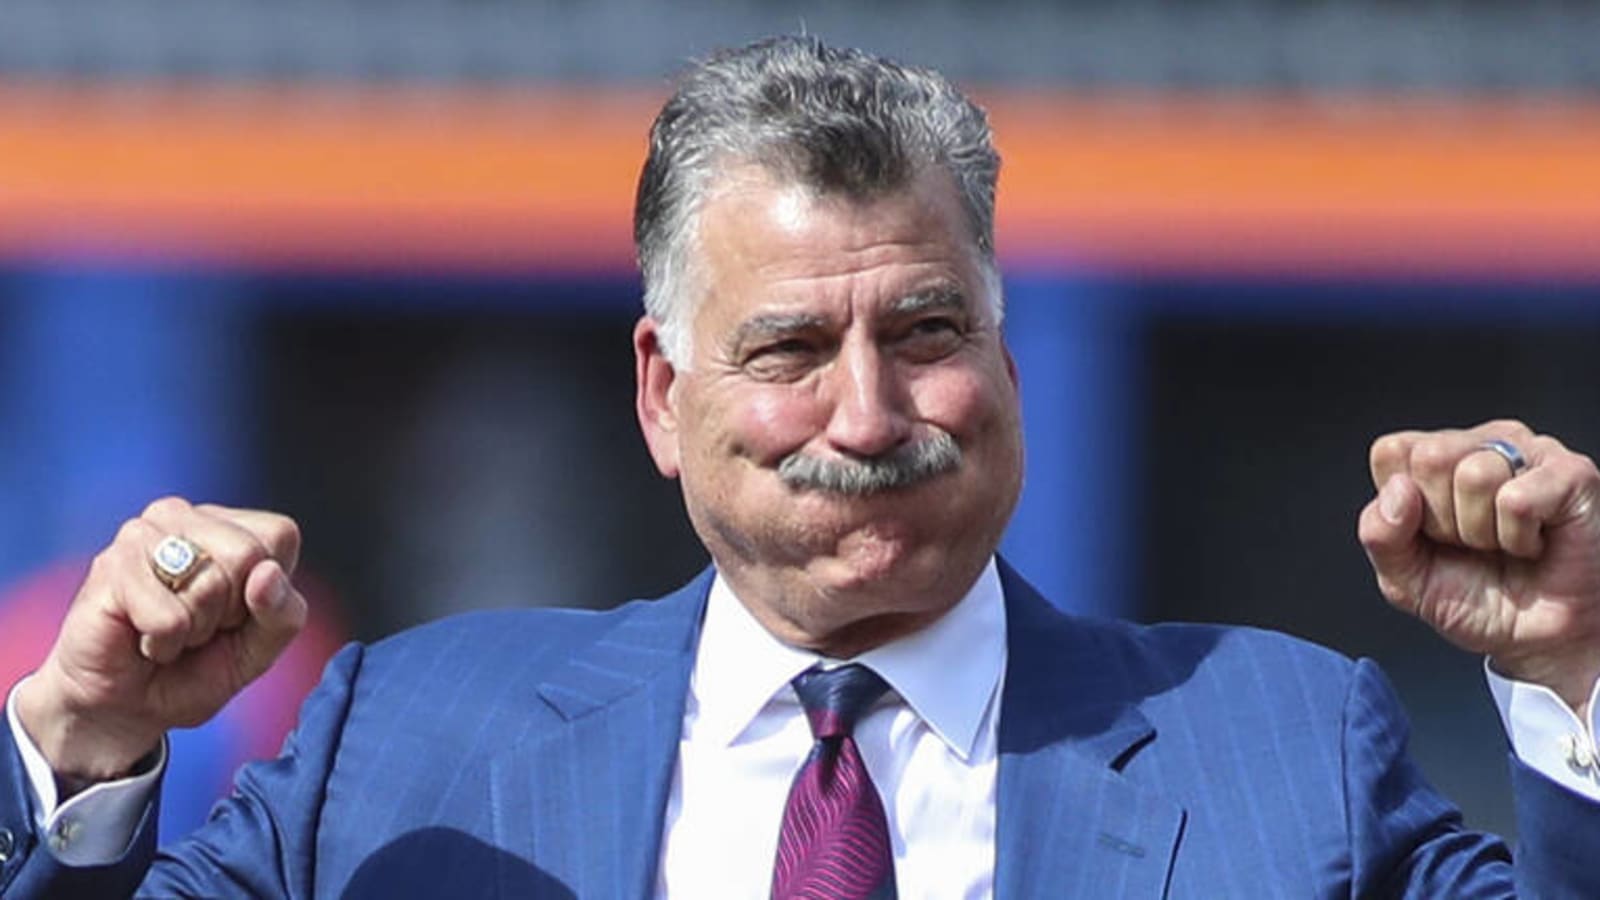 Retiring Keith Hernandez's number shows Mets are embracing history